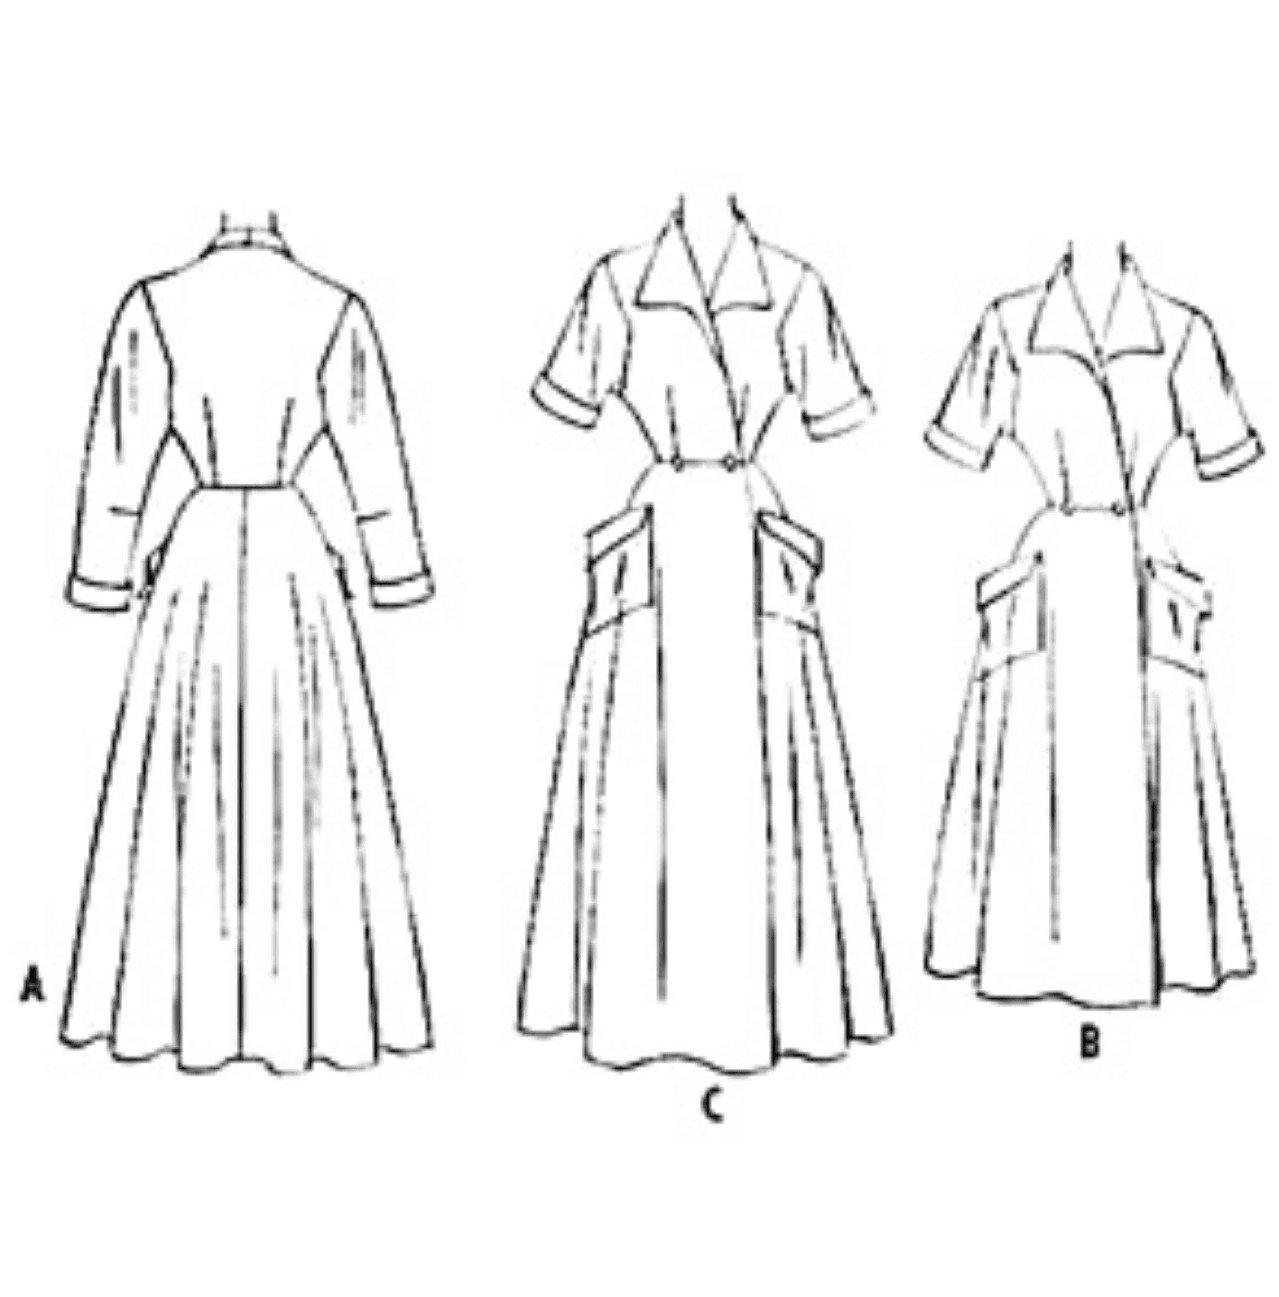 line drawing of Housecoats back and front views.